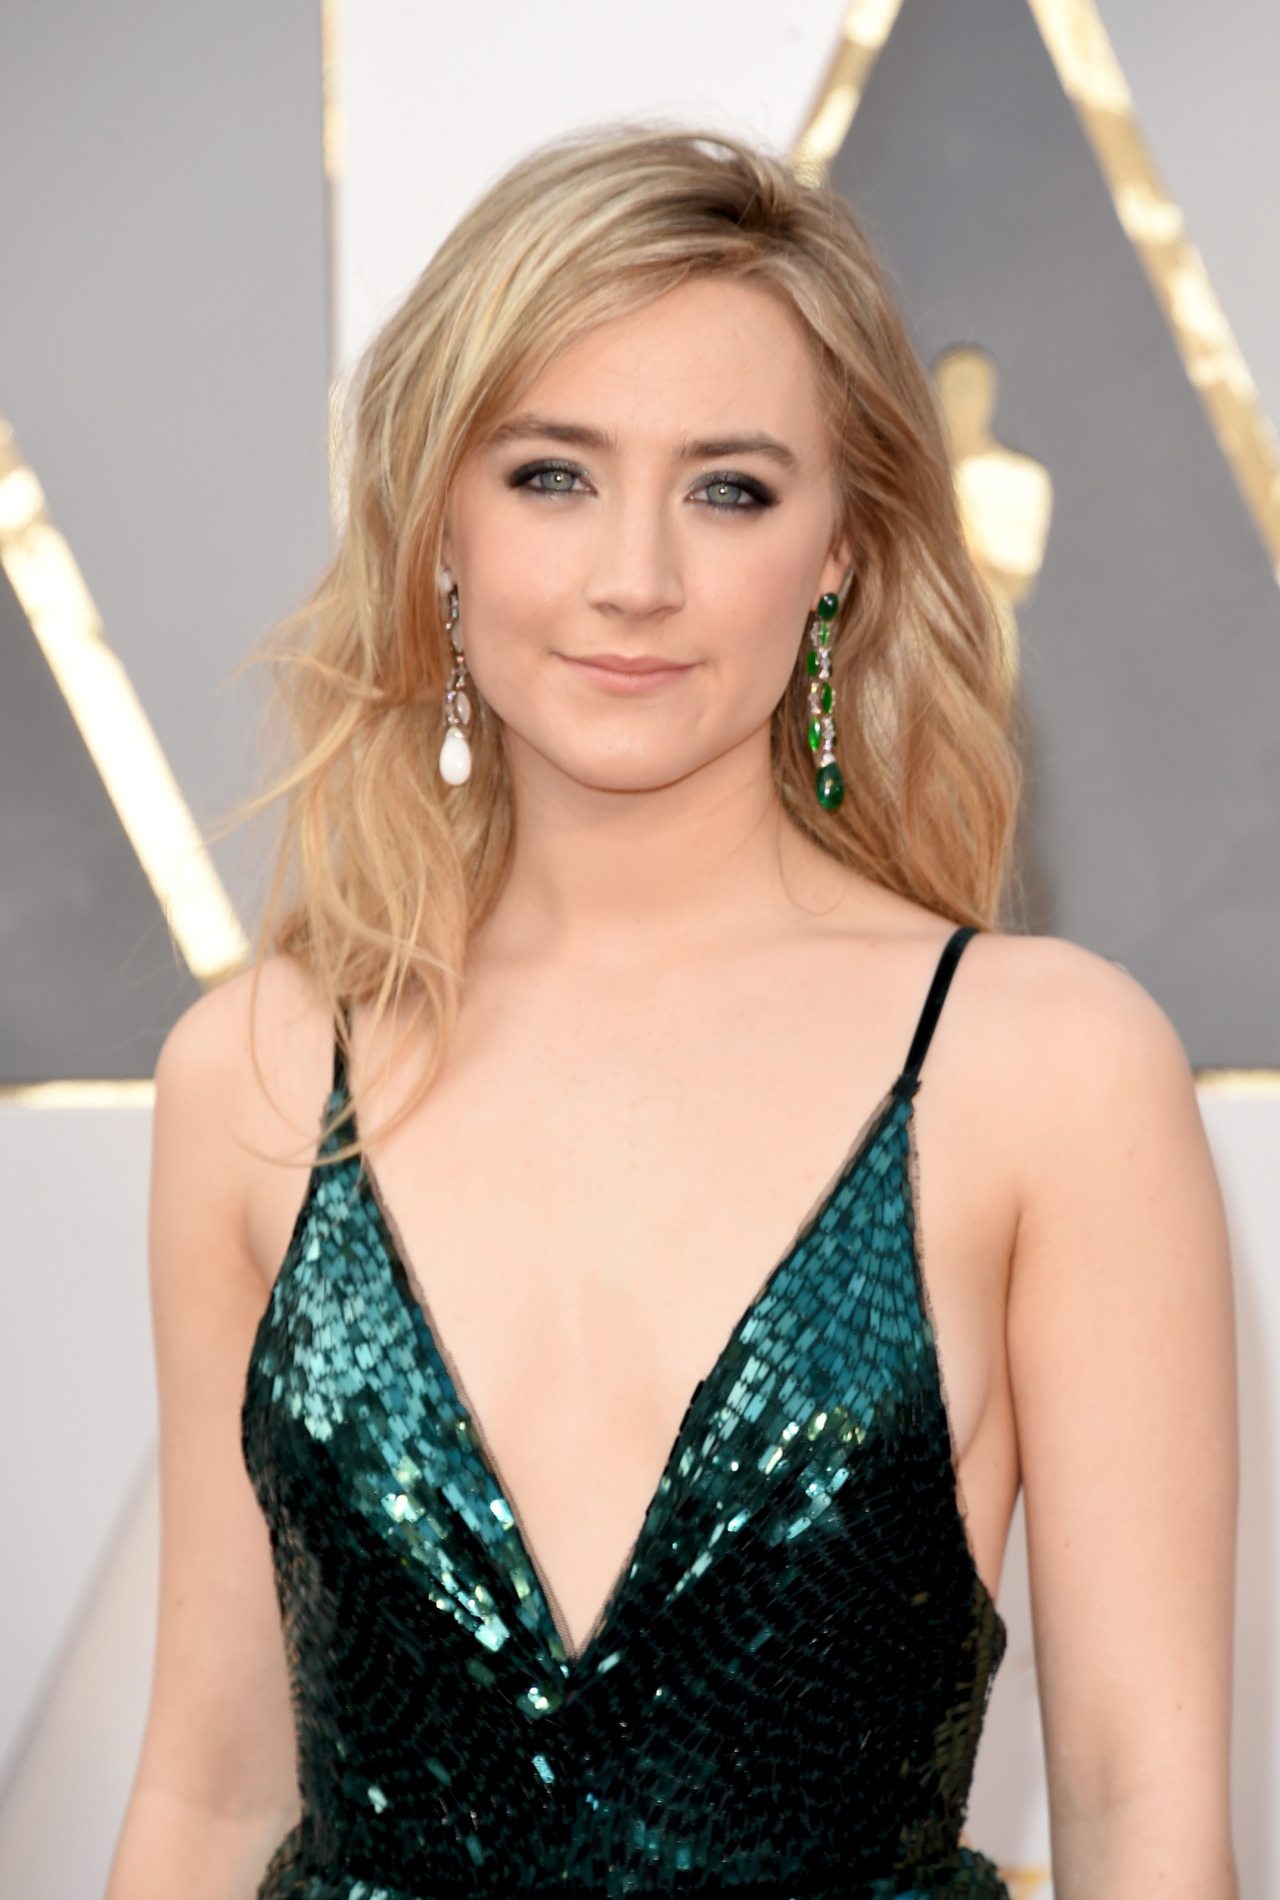 attends the 88th Annual Academy Awards at Hollywood & Highland Center on February 28, 2016 in Hollywood, California.